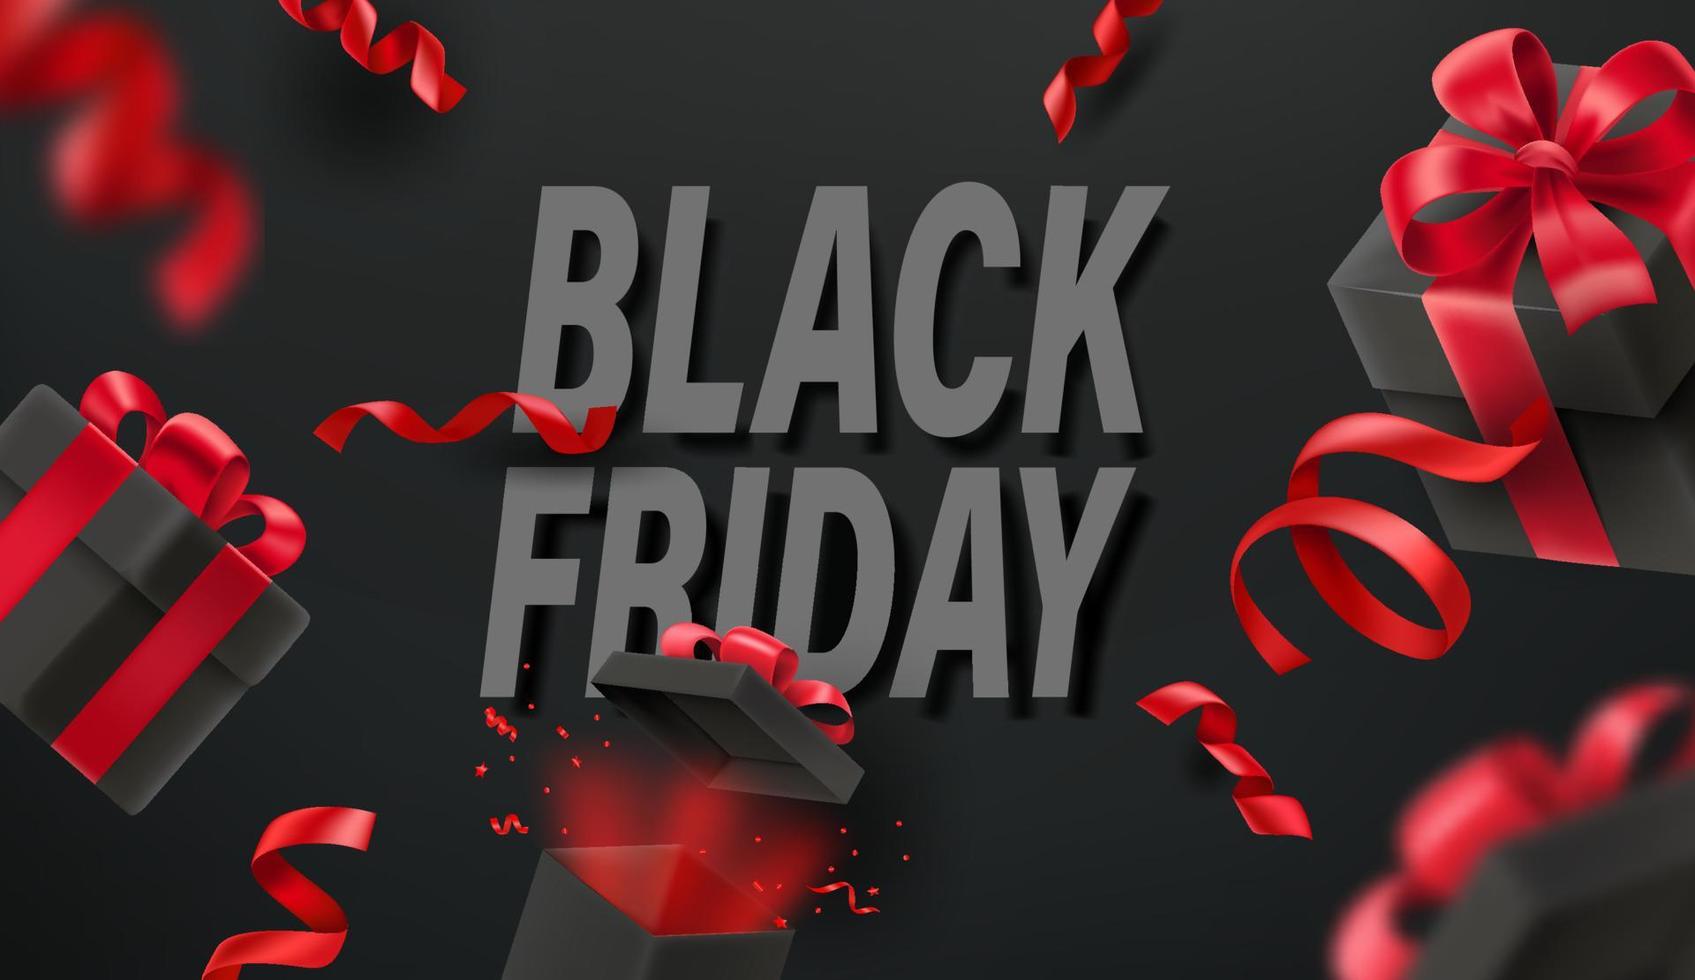 Black friday final sale vector banner with red ribbons and gift boxes